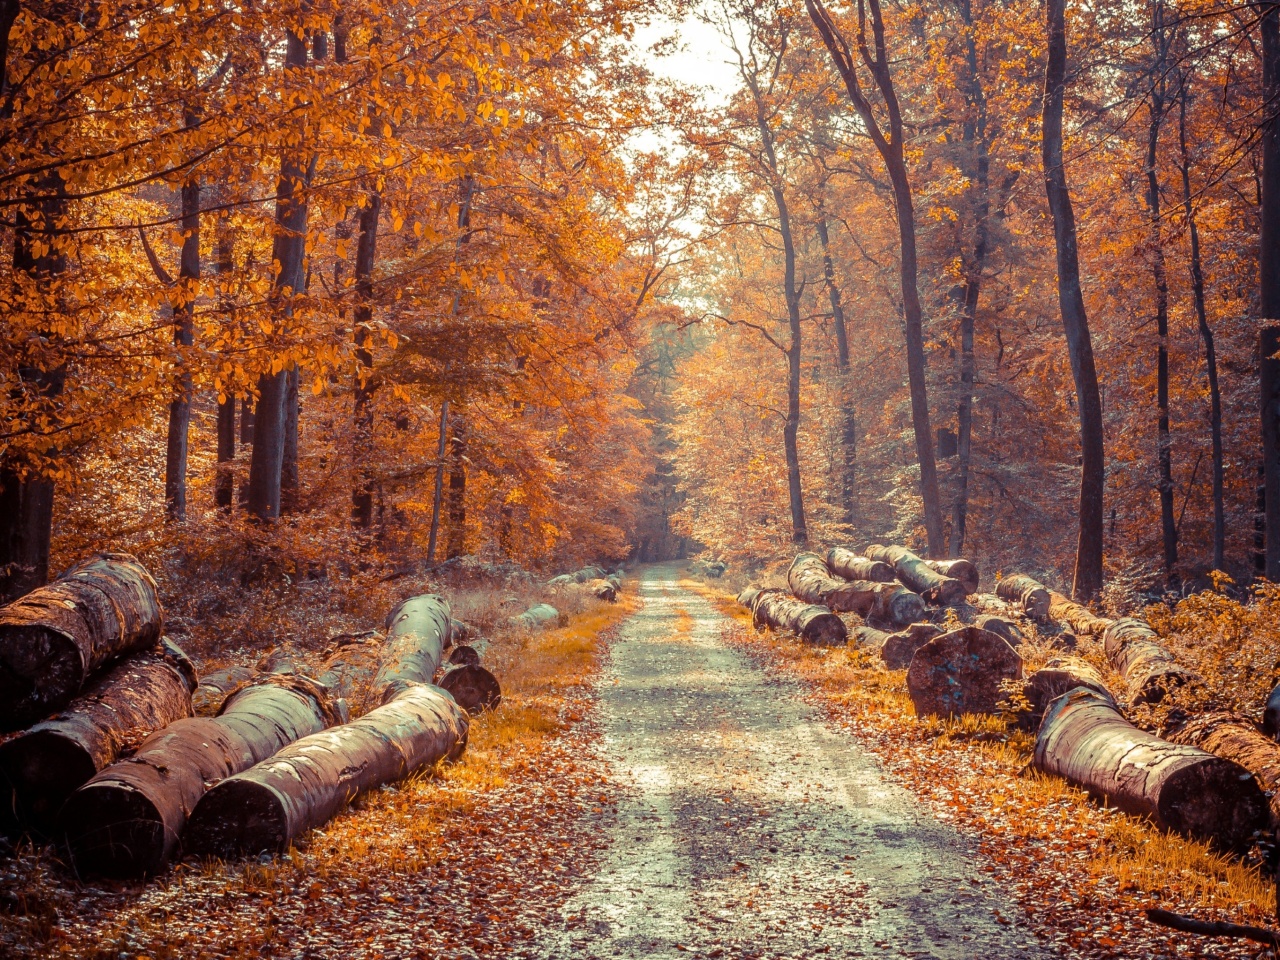 Road in the wild autumn forest screenshot #1 1280x960